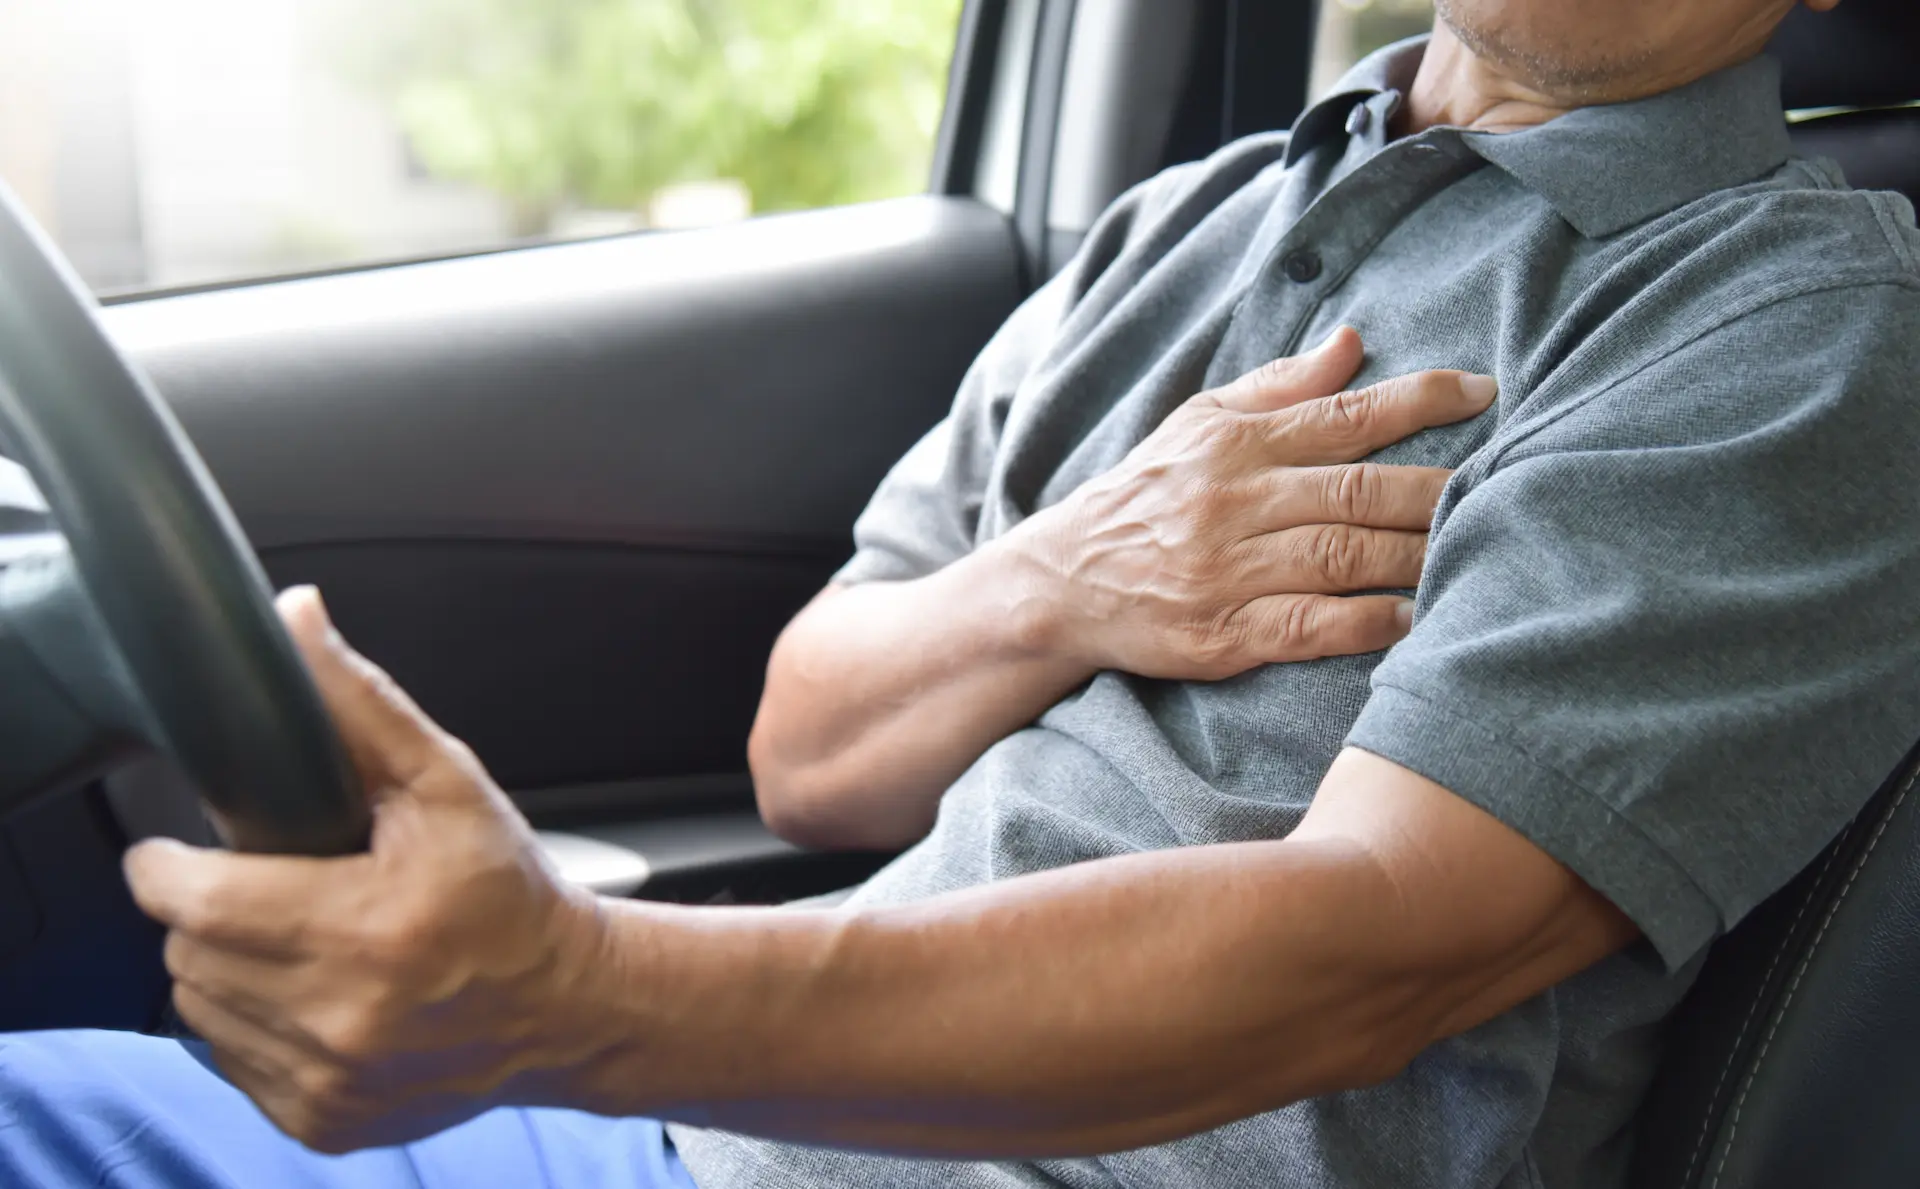 Aortic Dissection Injuries (Torn Aorta) From Car Accident in Houston